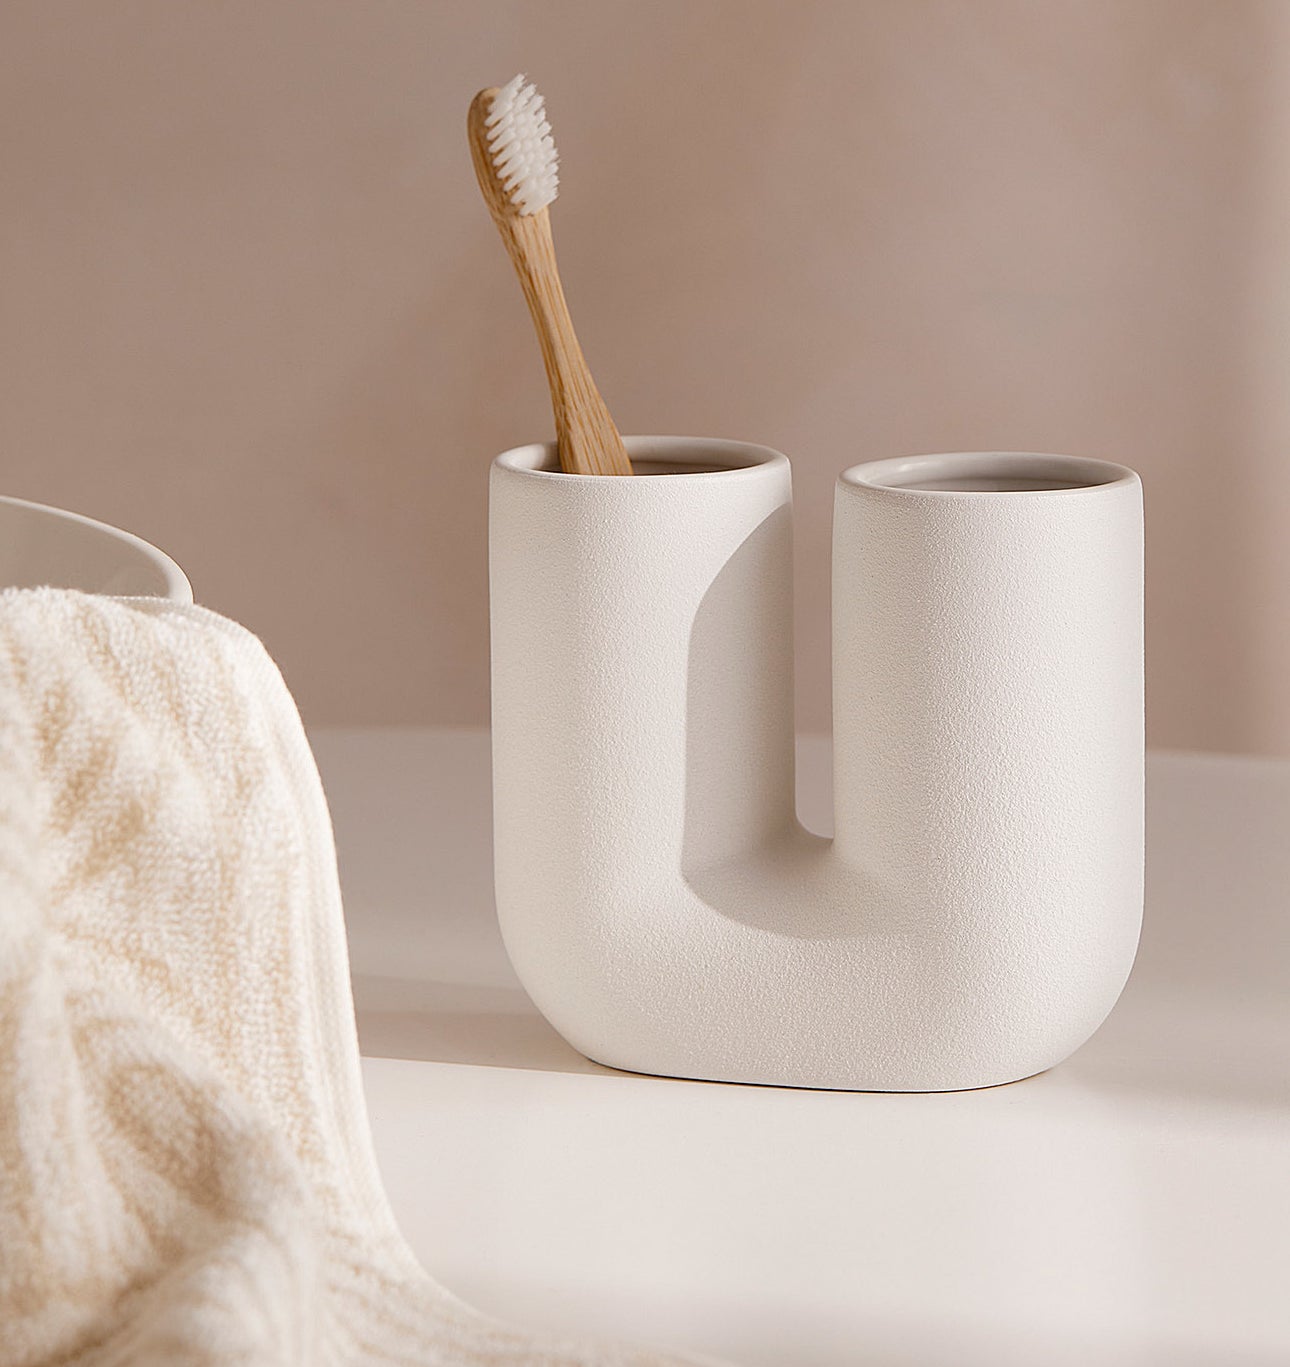 The toothbrush holder with a toothbrush inside